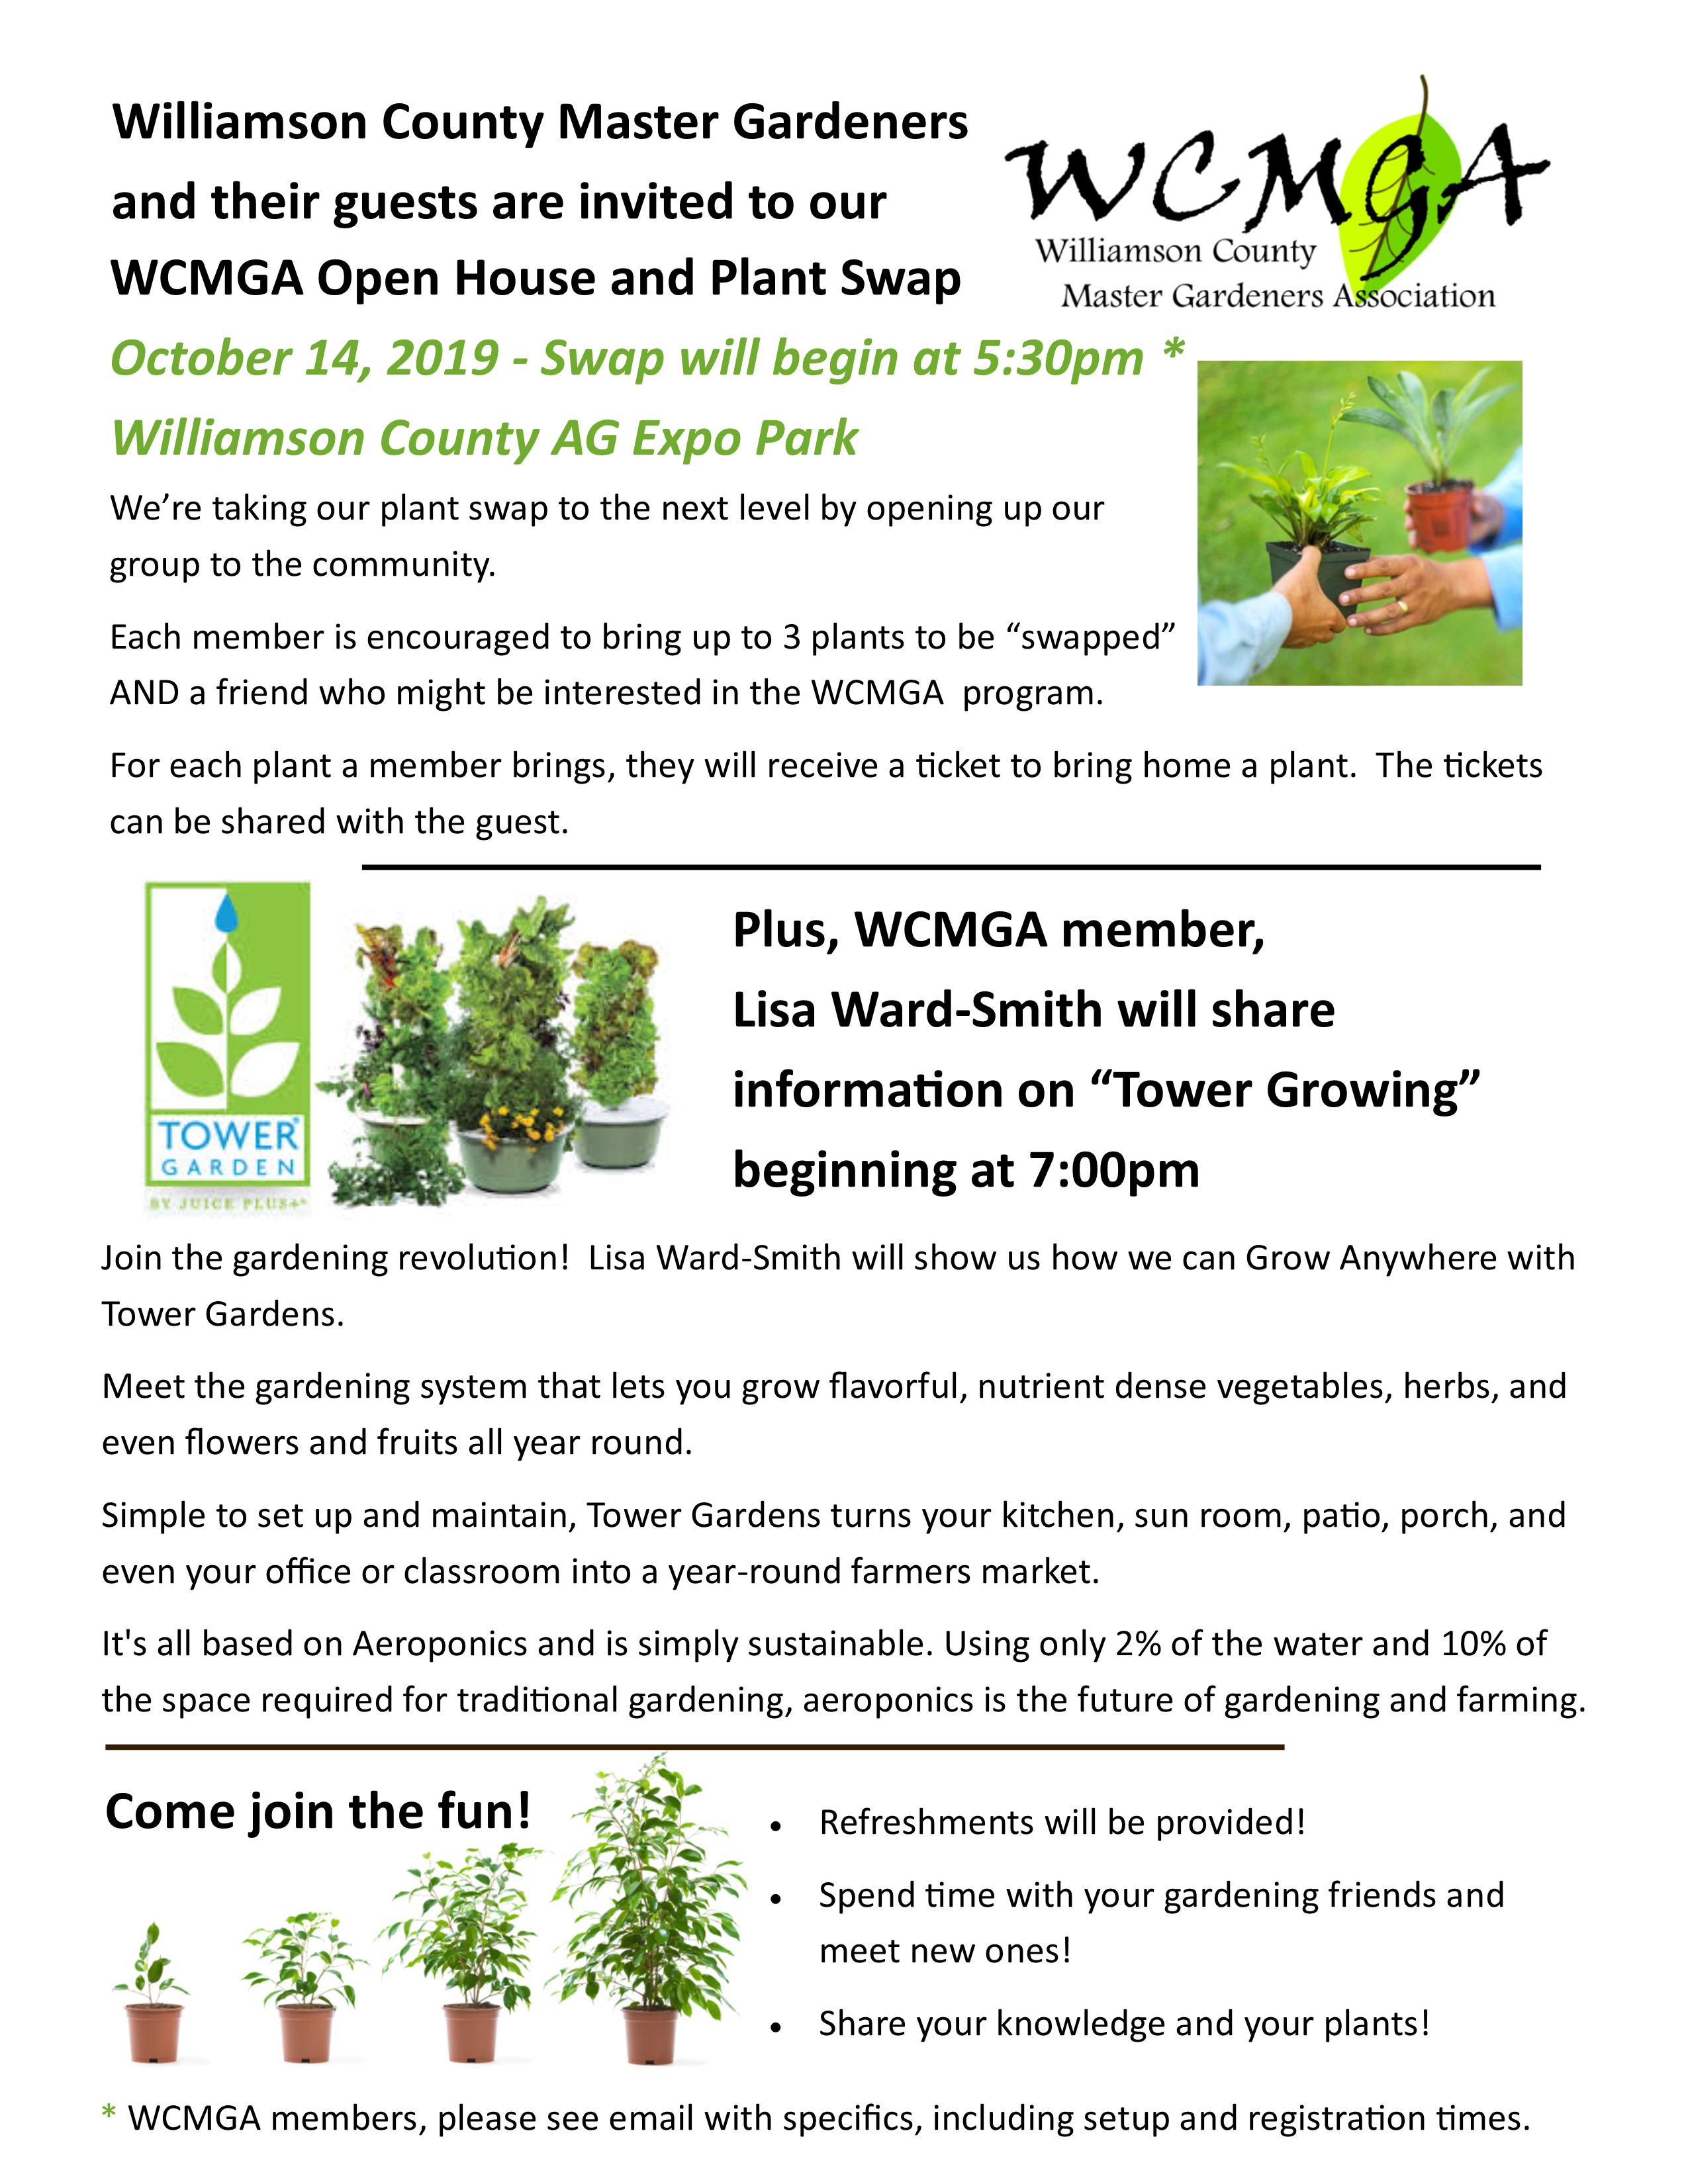 WCMGA Open House and Plant Swap